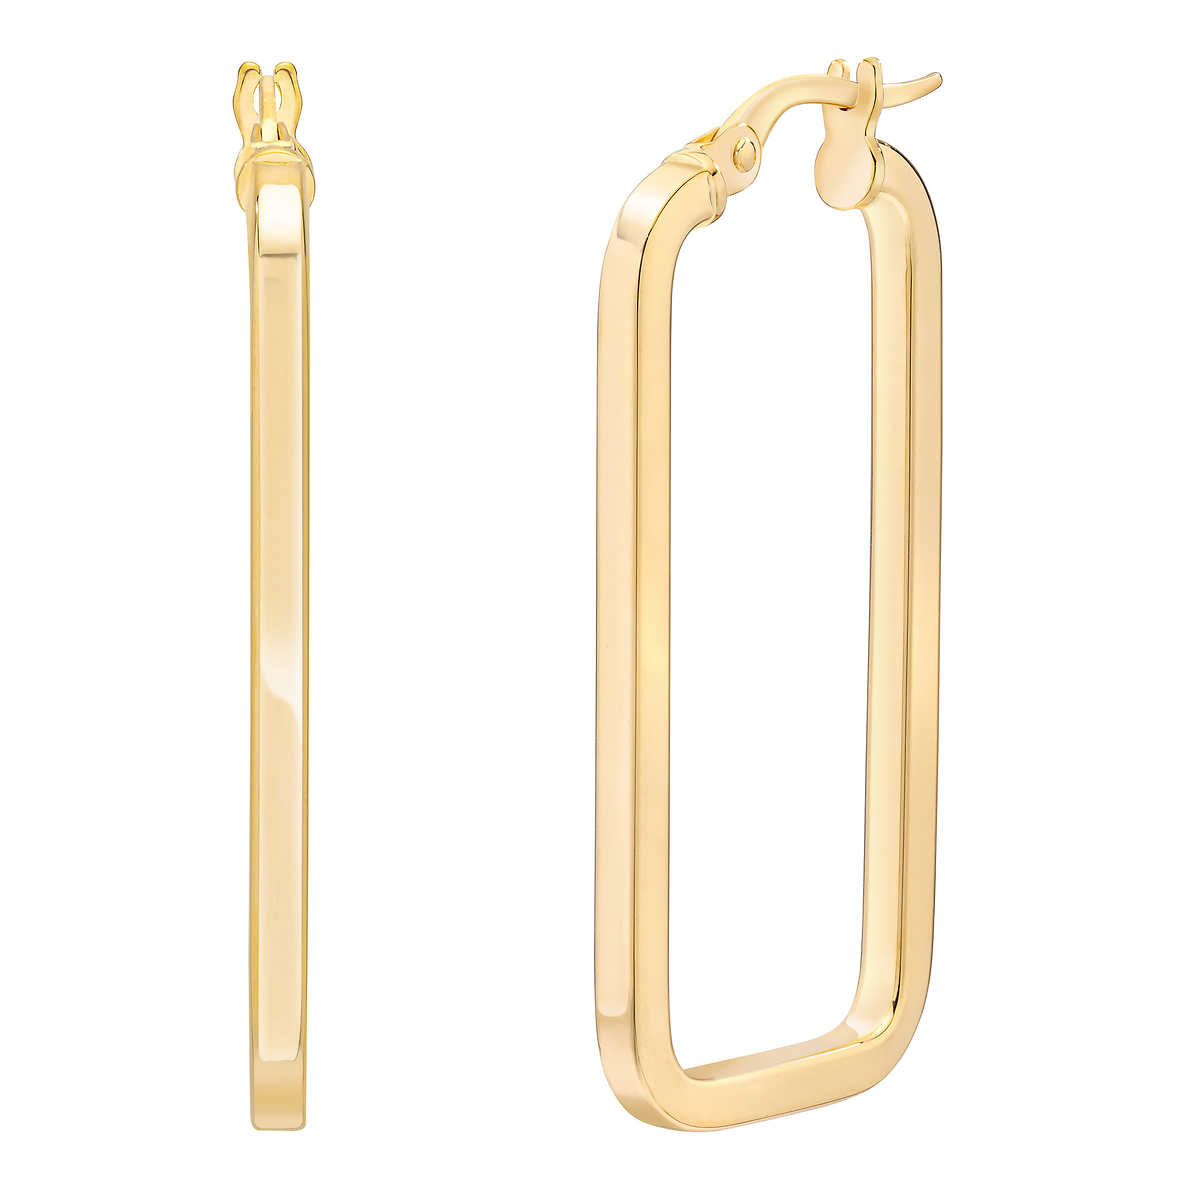 Rectangle & Chain Double Post Earring Gold